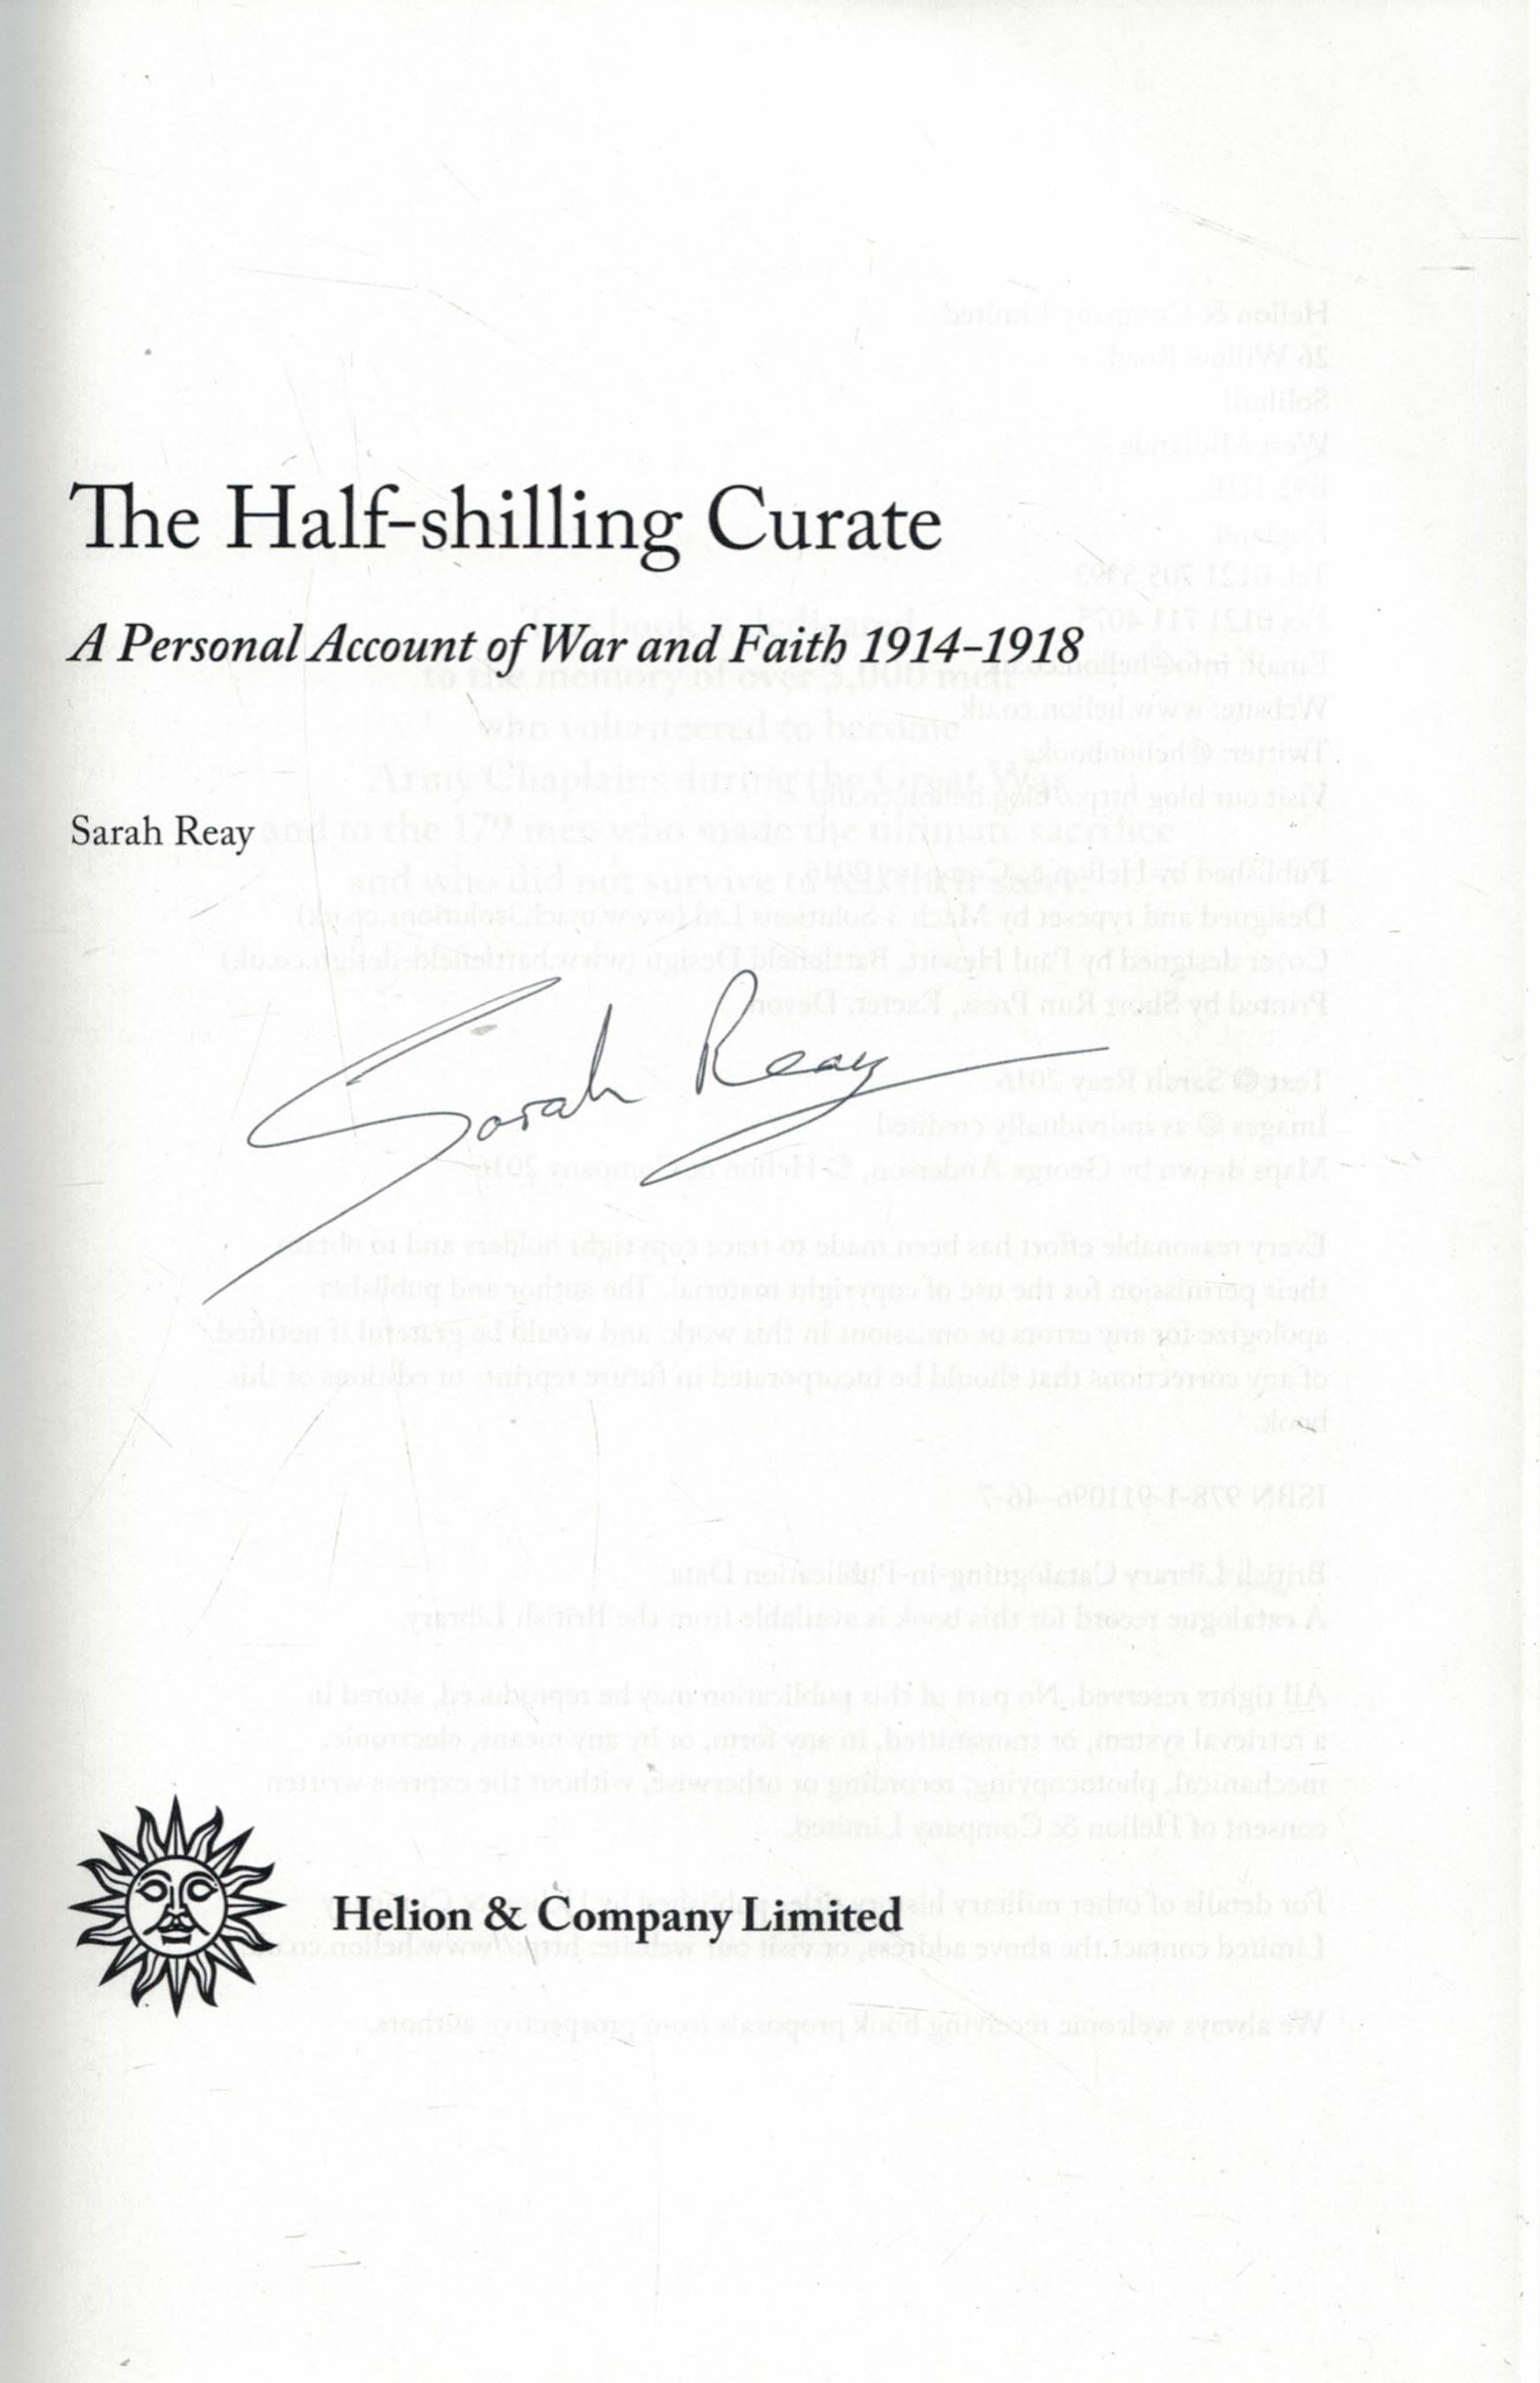 The Half-shilling Curate. A Personal Account of War and Faith 1914-1918. Signed copy.